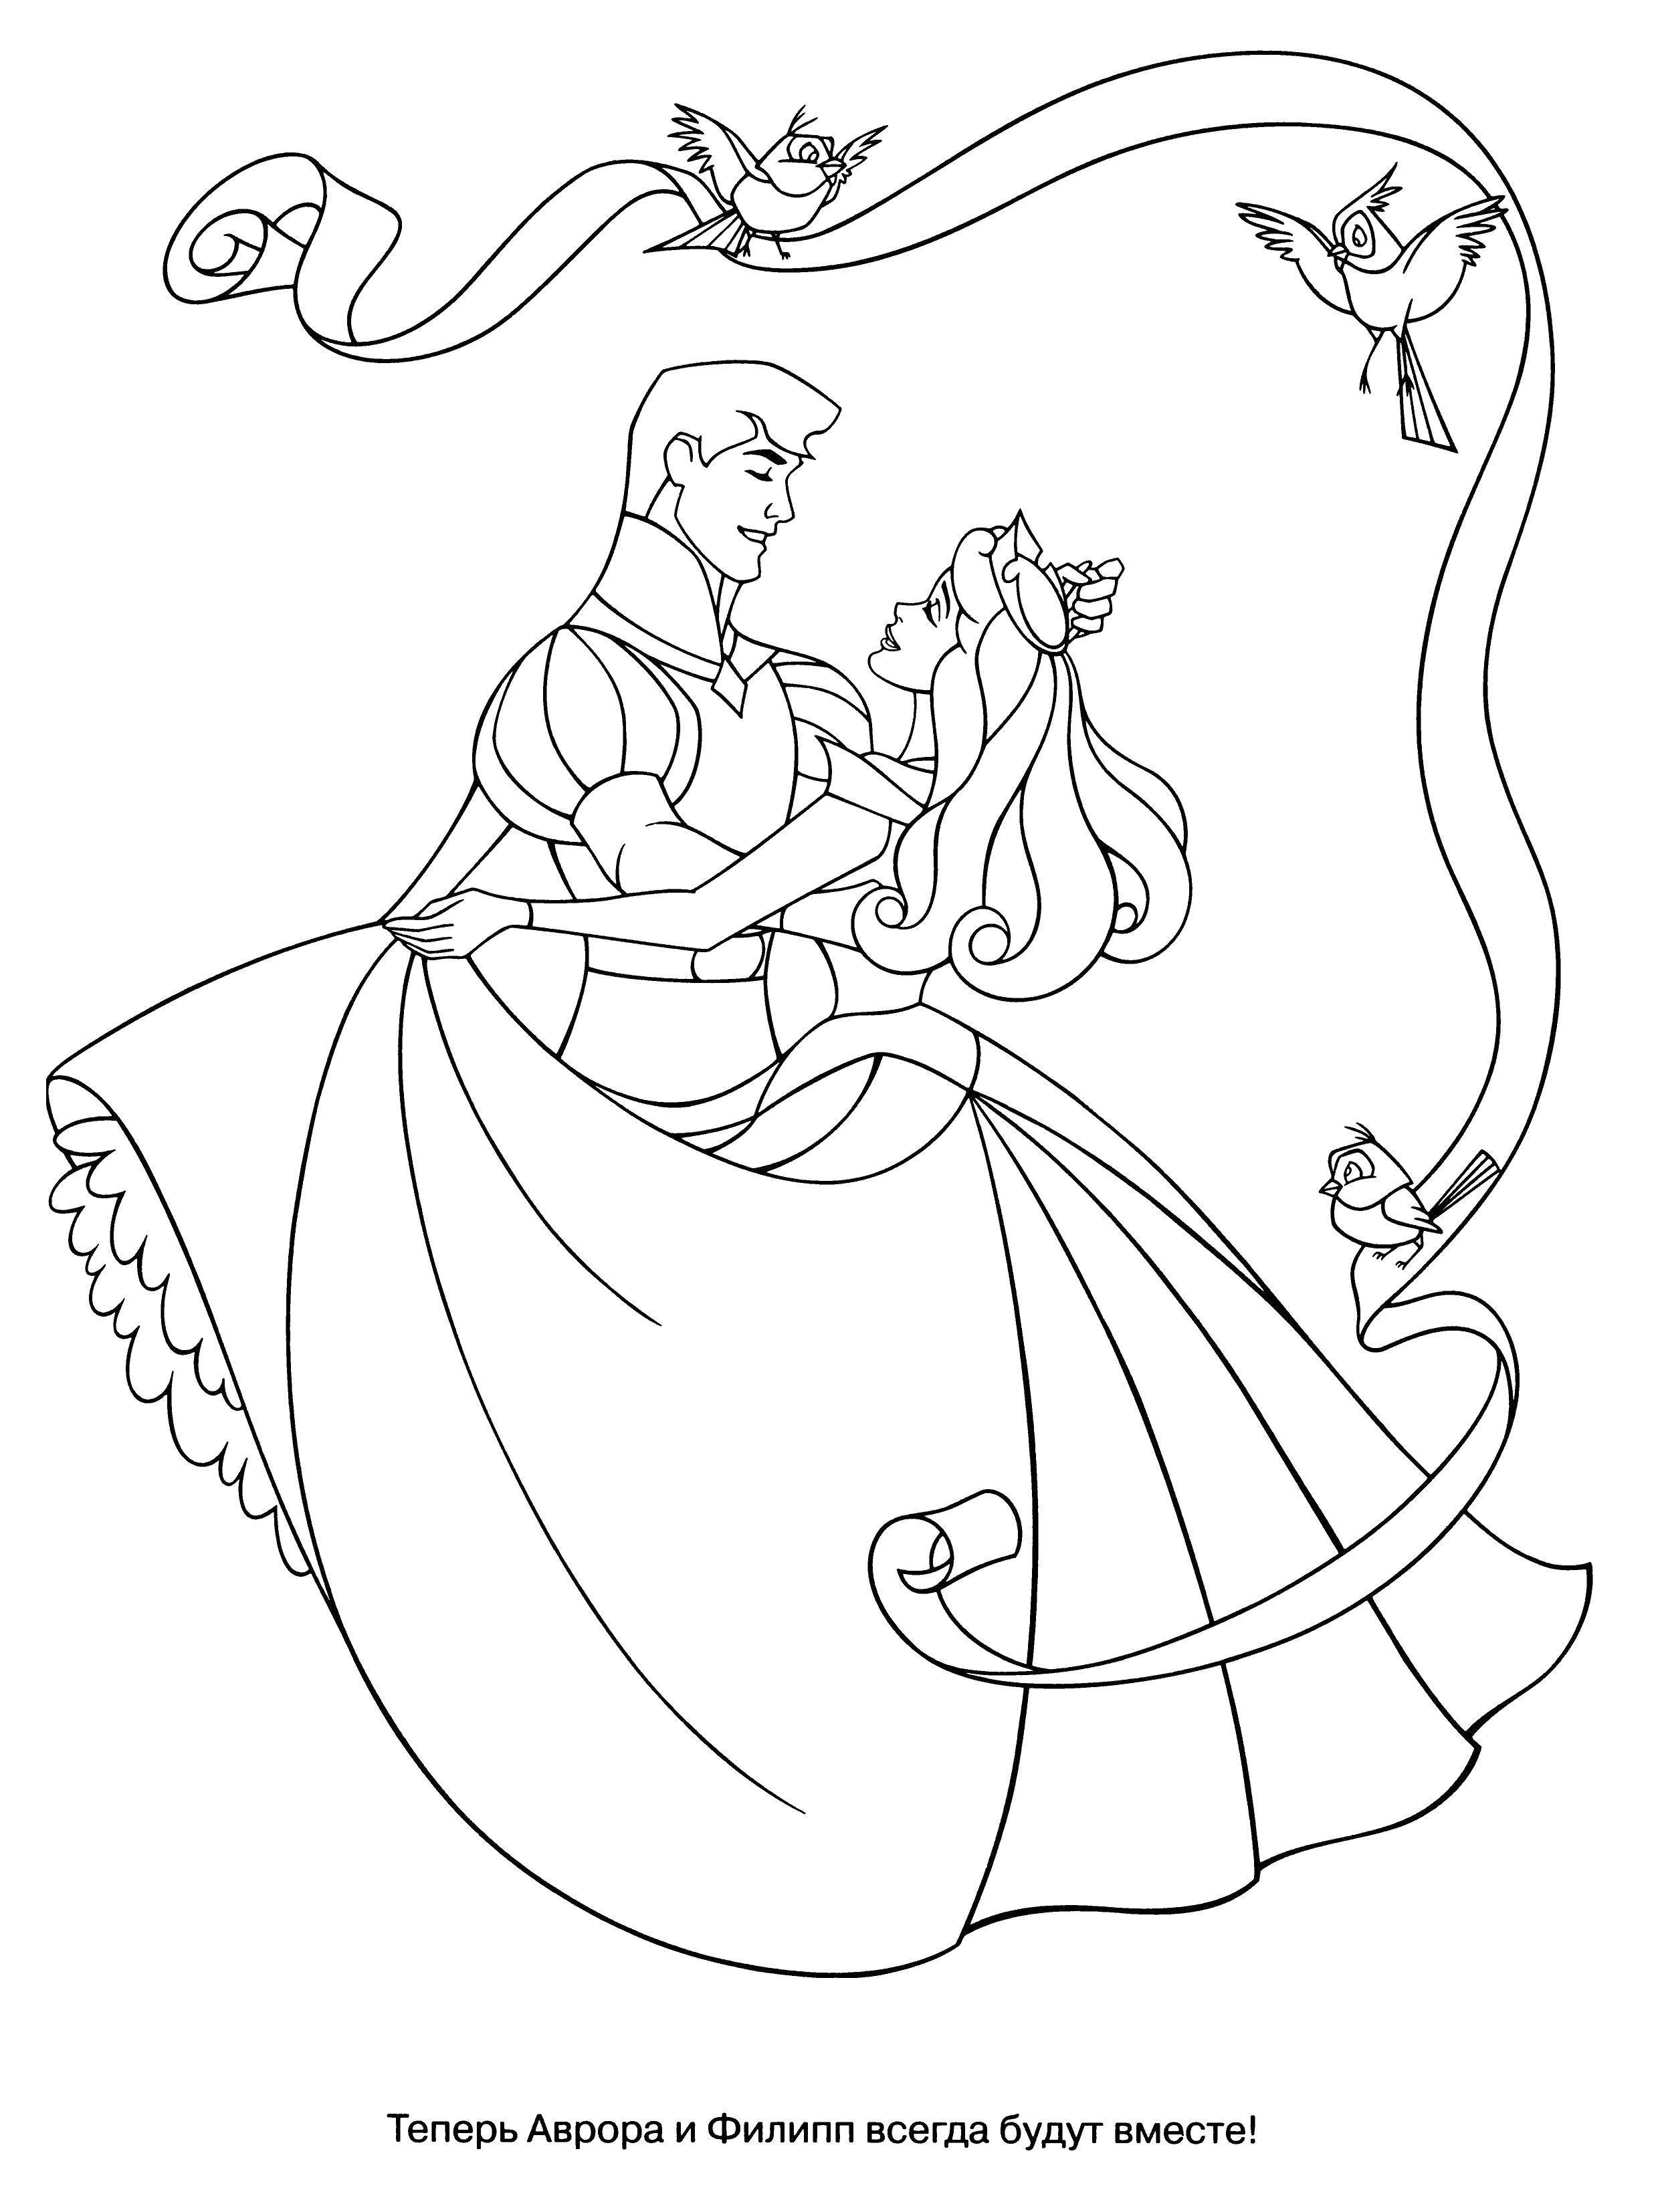 Coloring Aurora and flipp. Category cartoons. Tags:  Aurora, Prince Phillip.